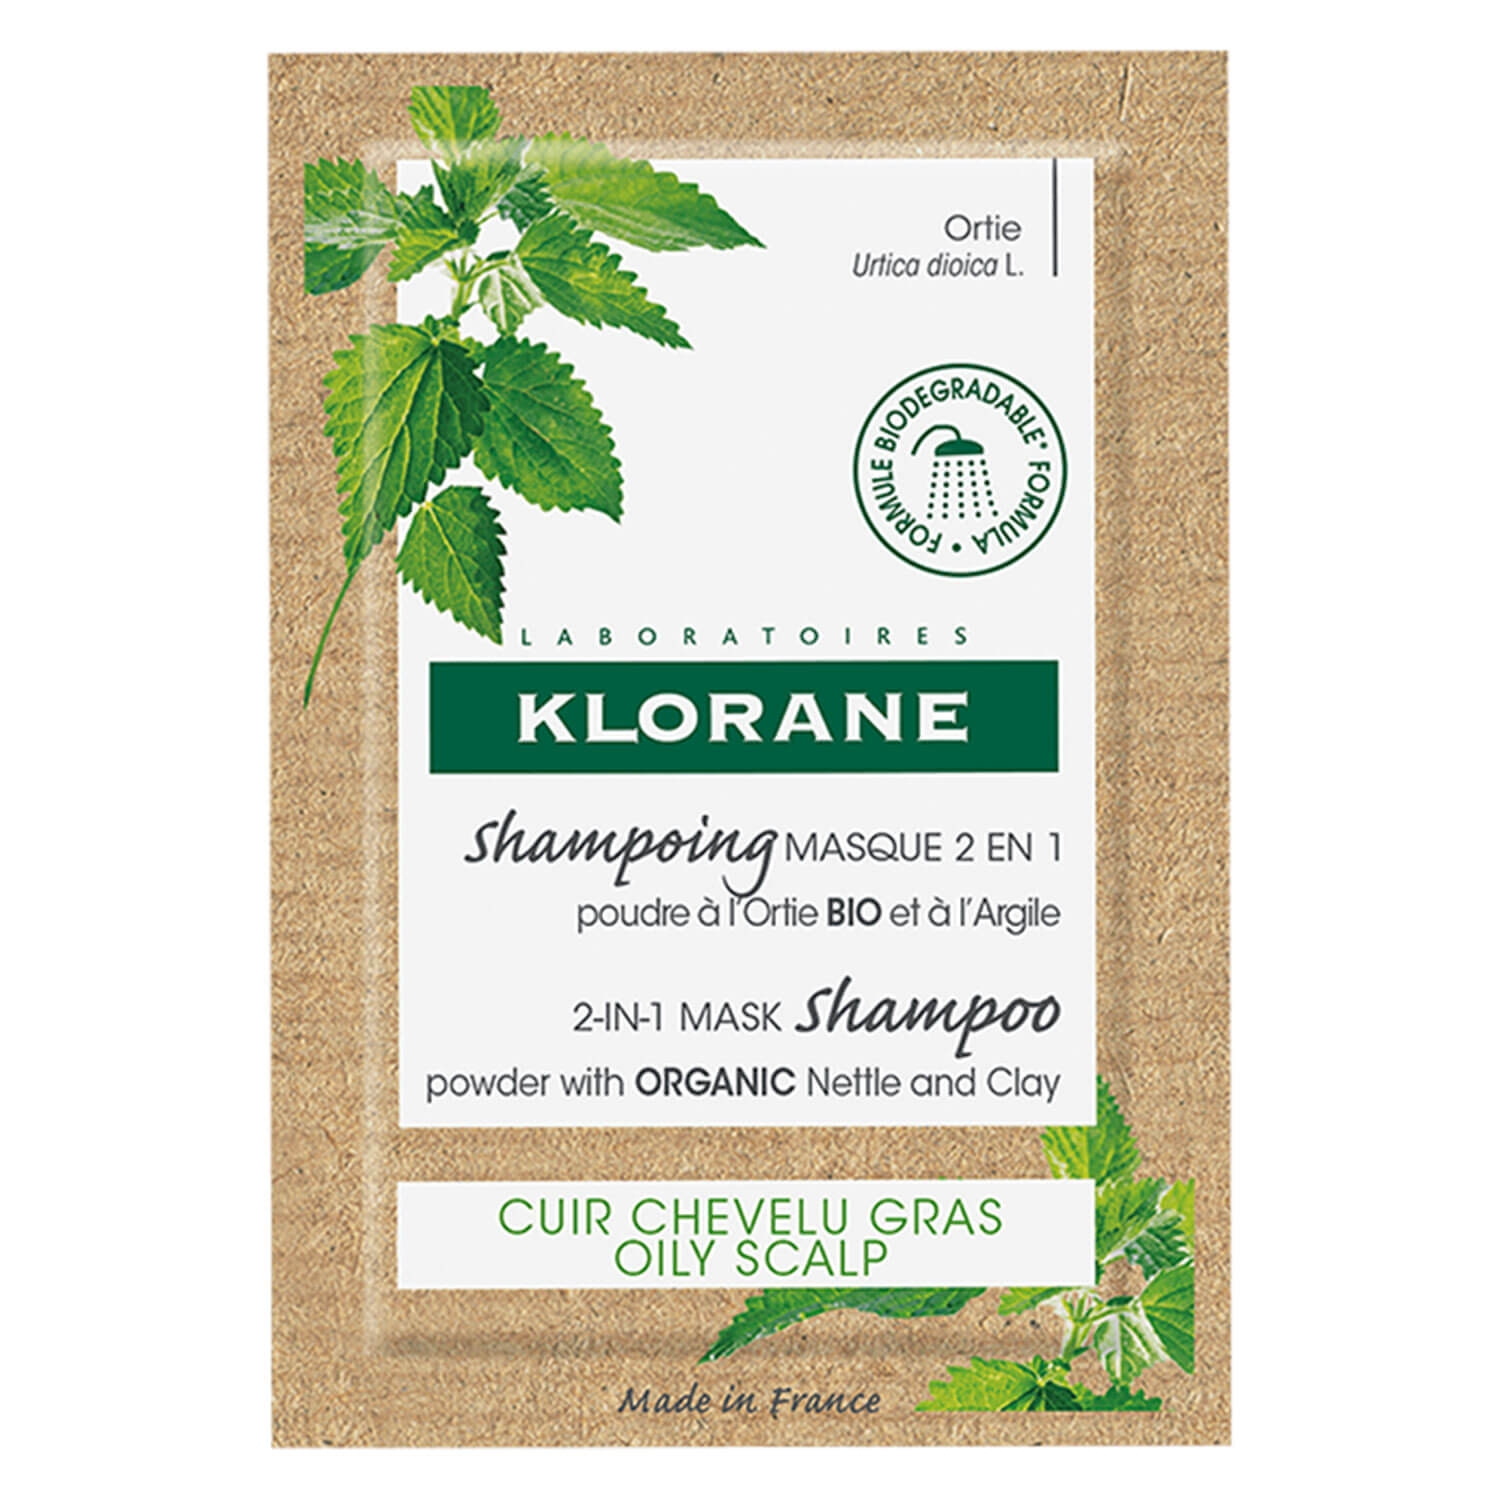 Product image from KLORANE Hair - Puder-Shampoo-Maske 2in1 mit BIO-Brennessel